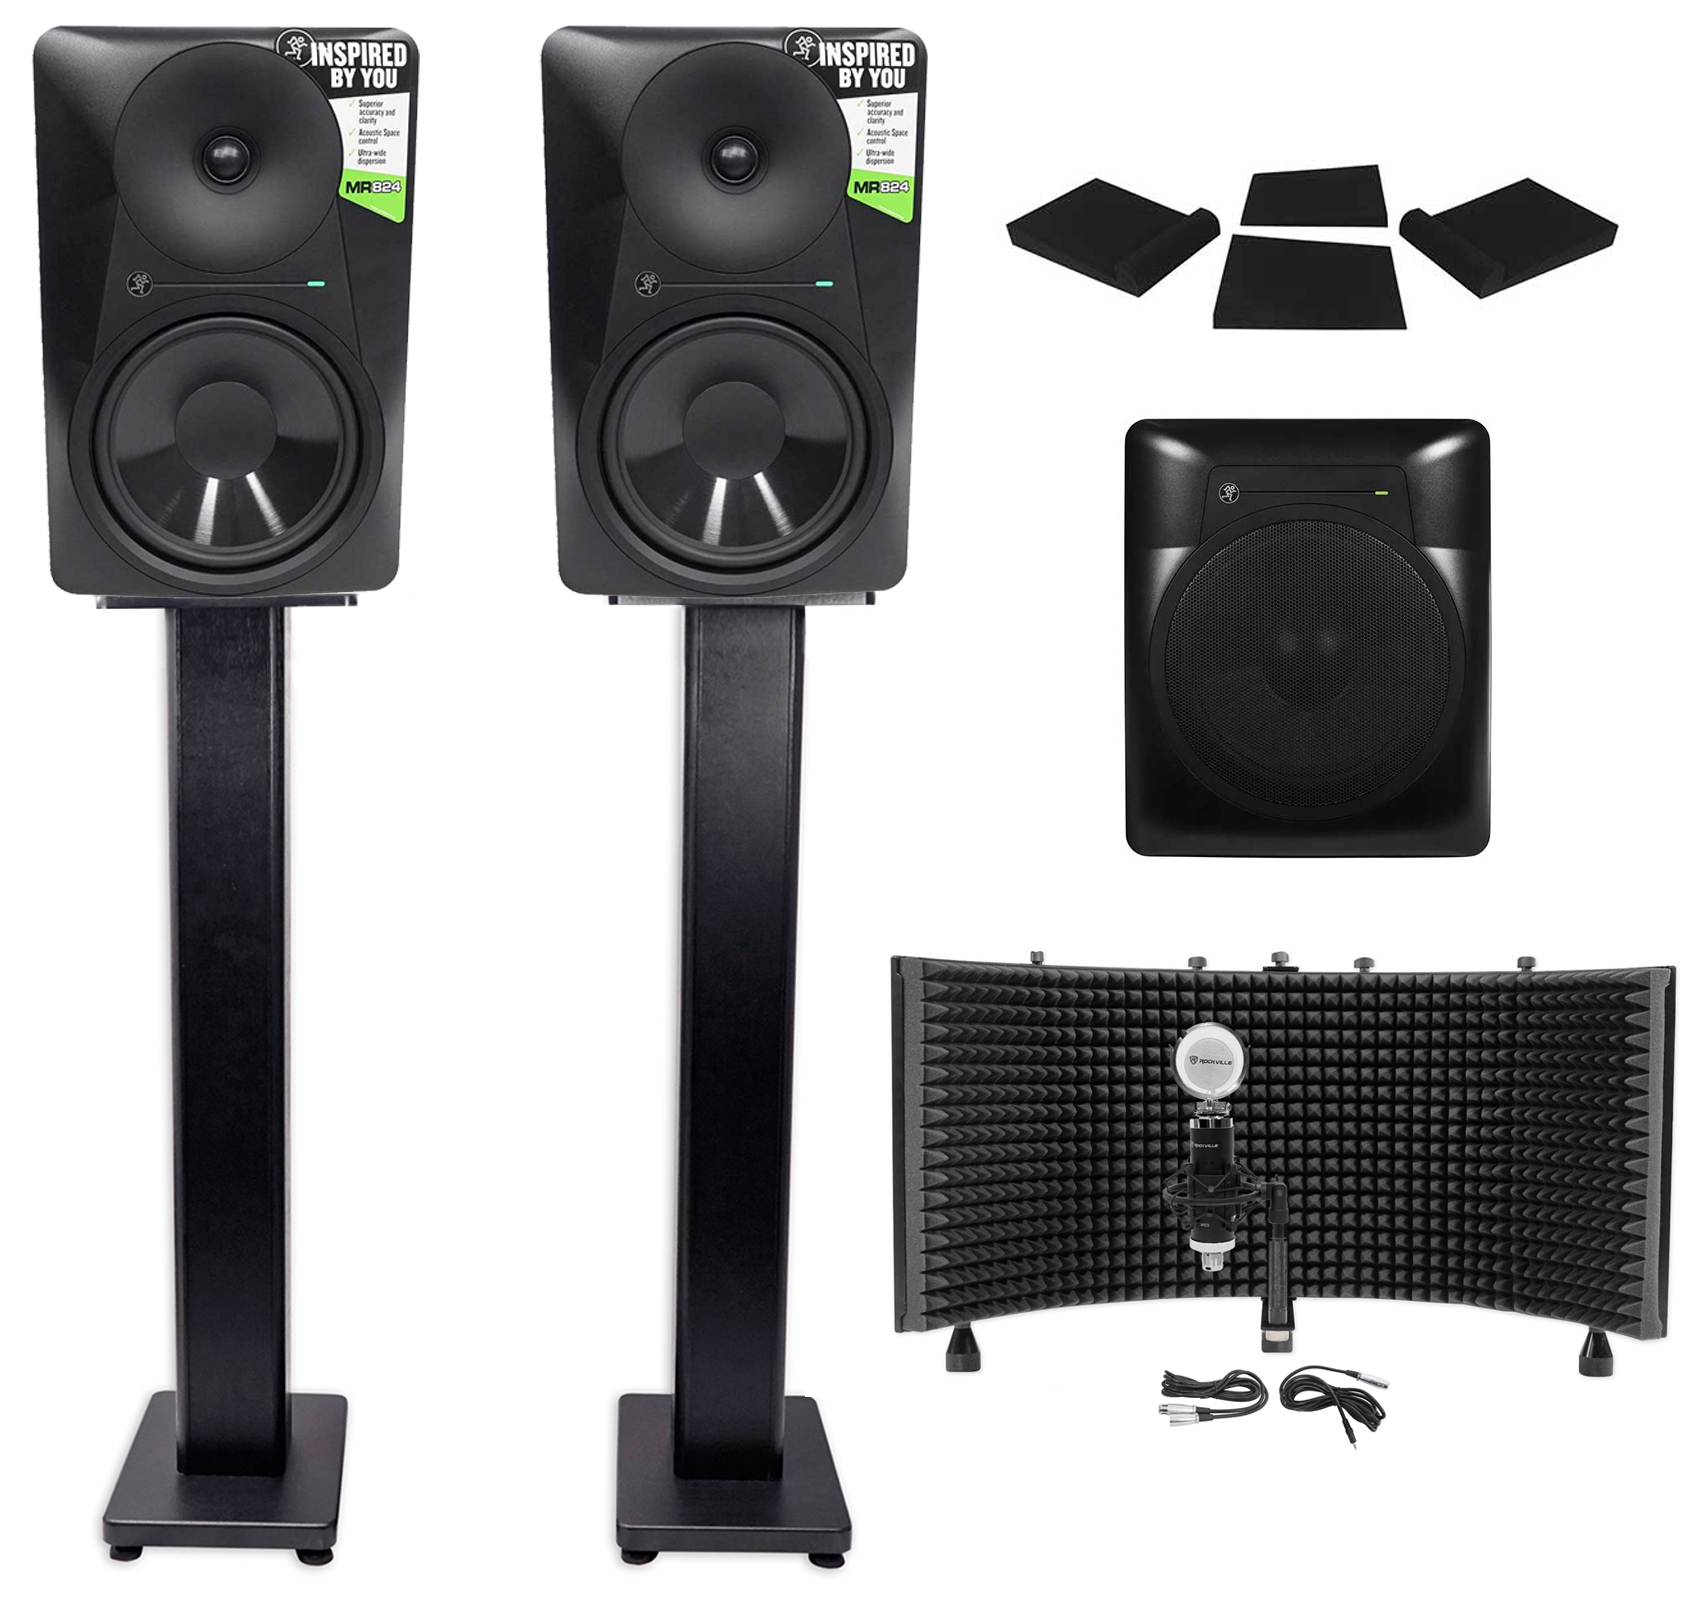 2 Mackie MR824 8” Powered Studio Monitors+10" Active Sub+Mic+Mount+Stands+Pads - image 1 of 10